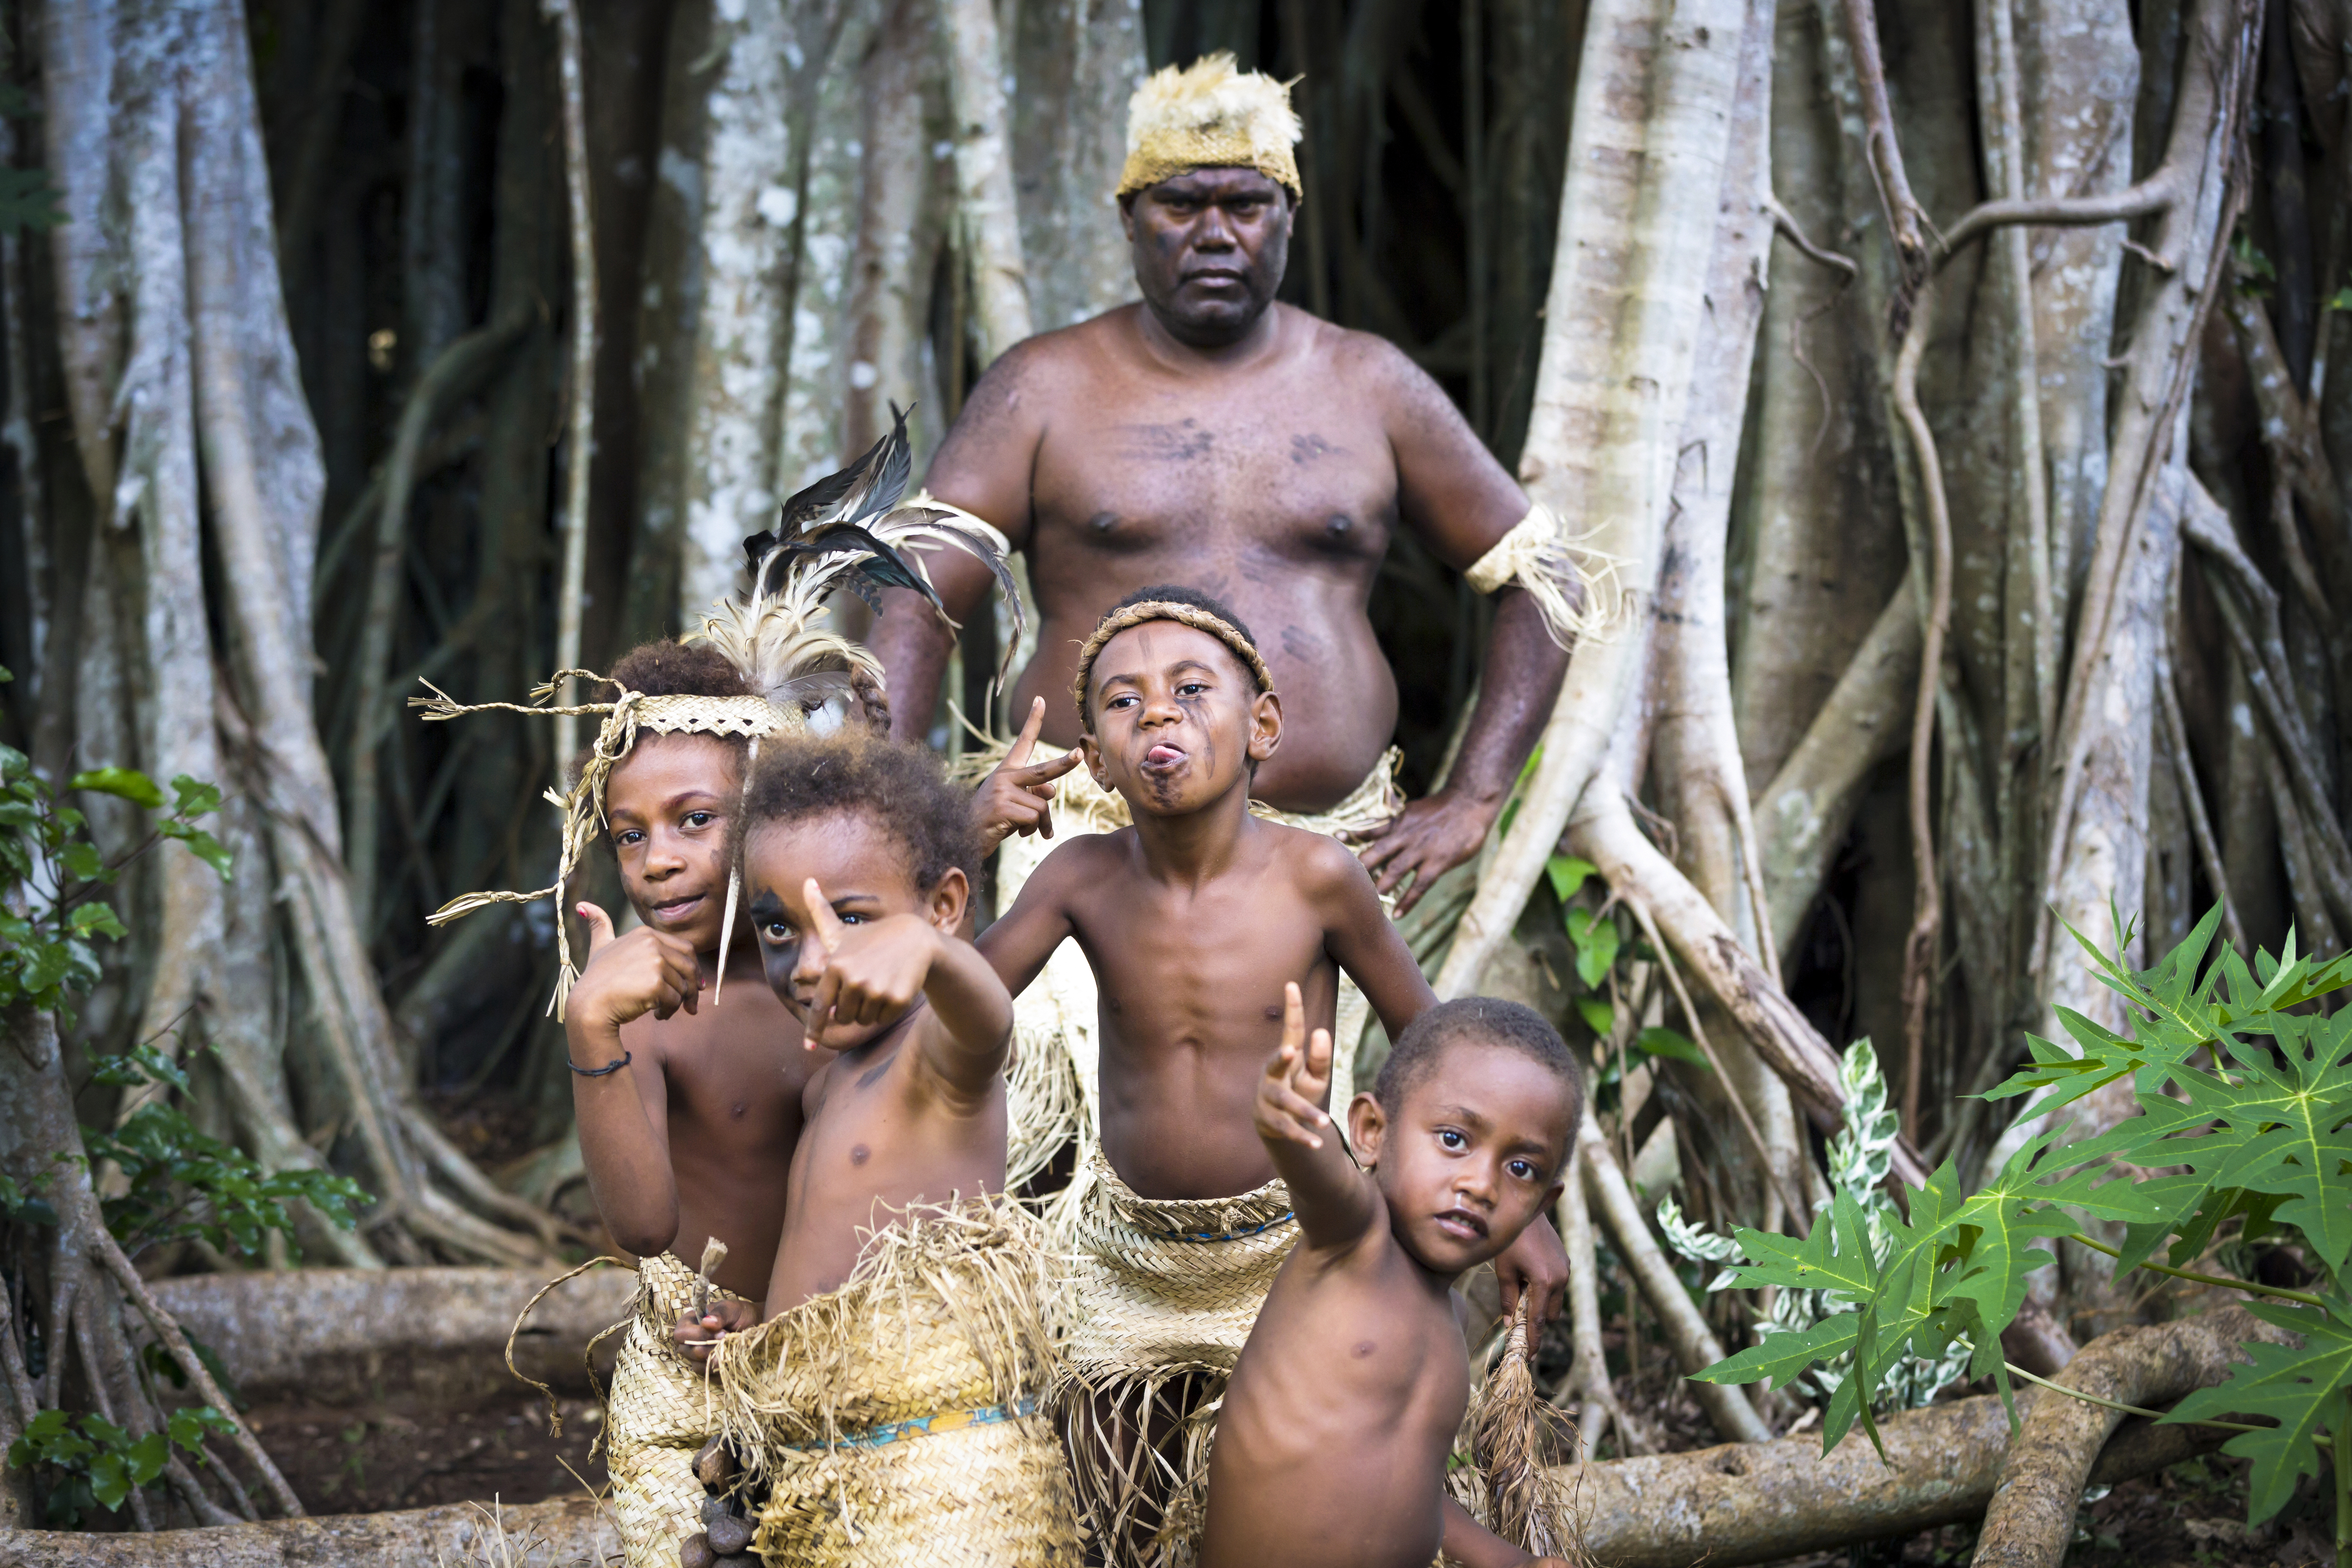 The chief and group of children before tribal ceremony, Vanuatu